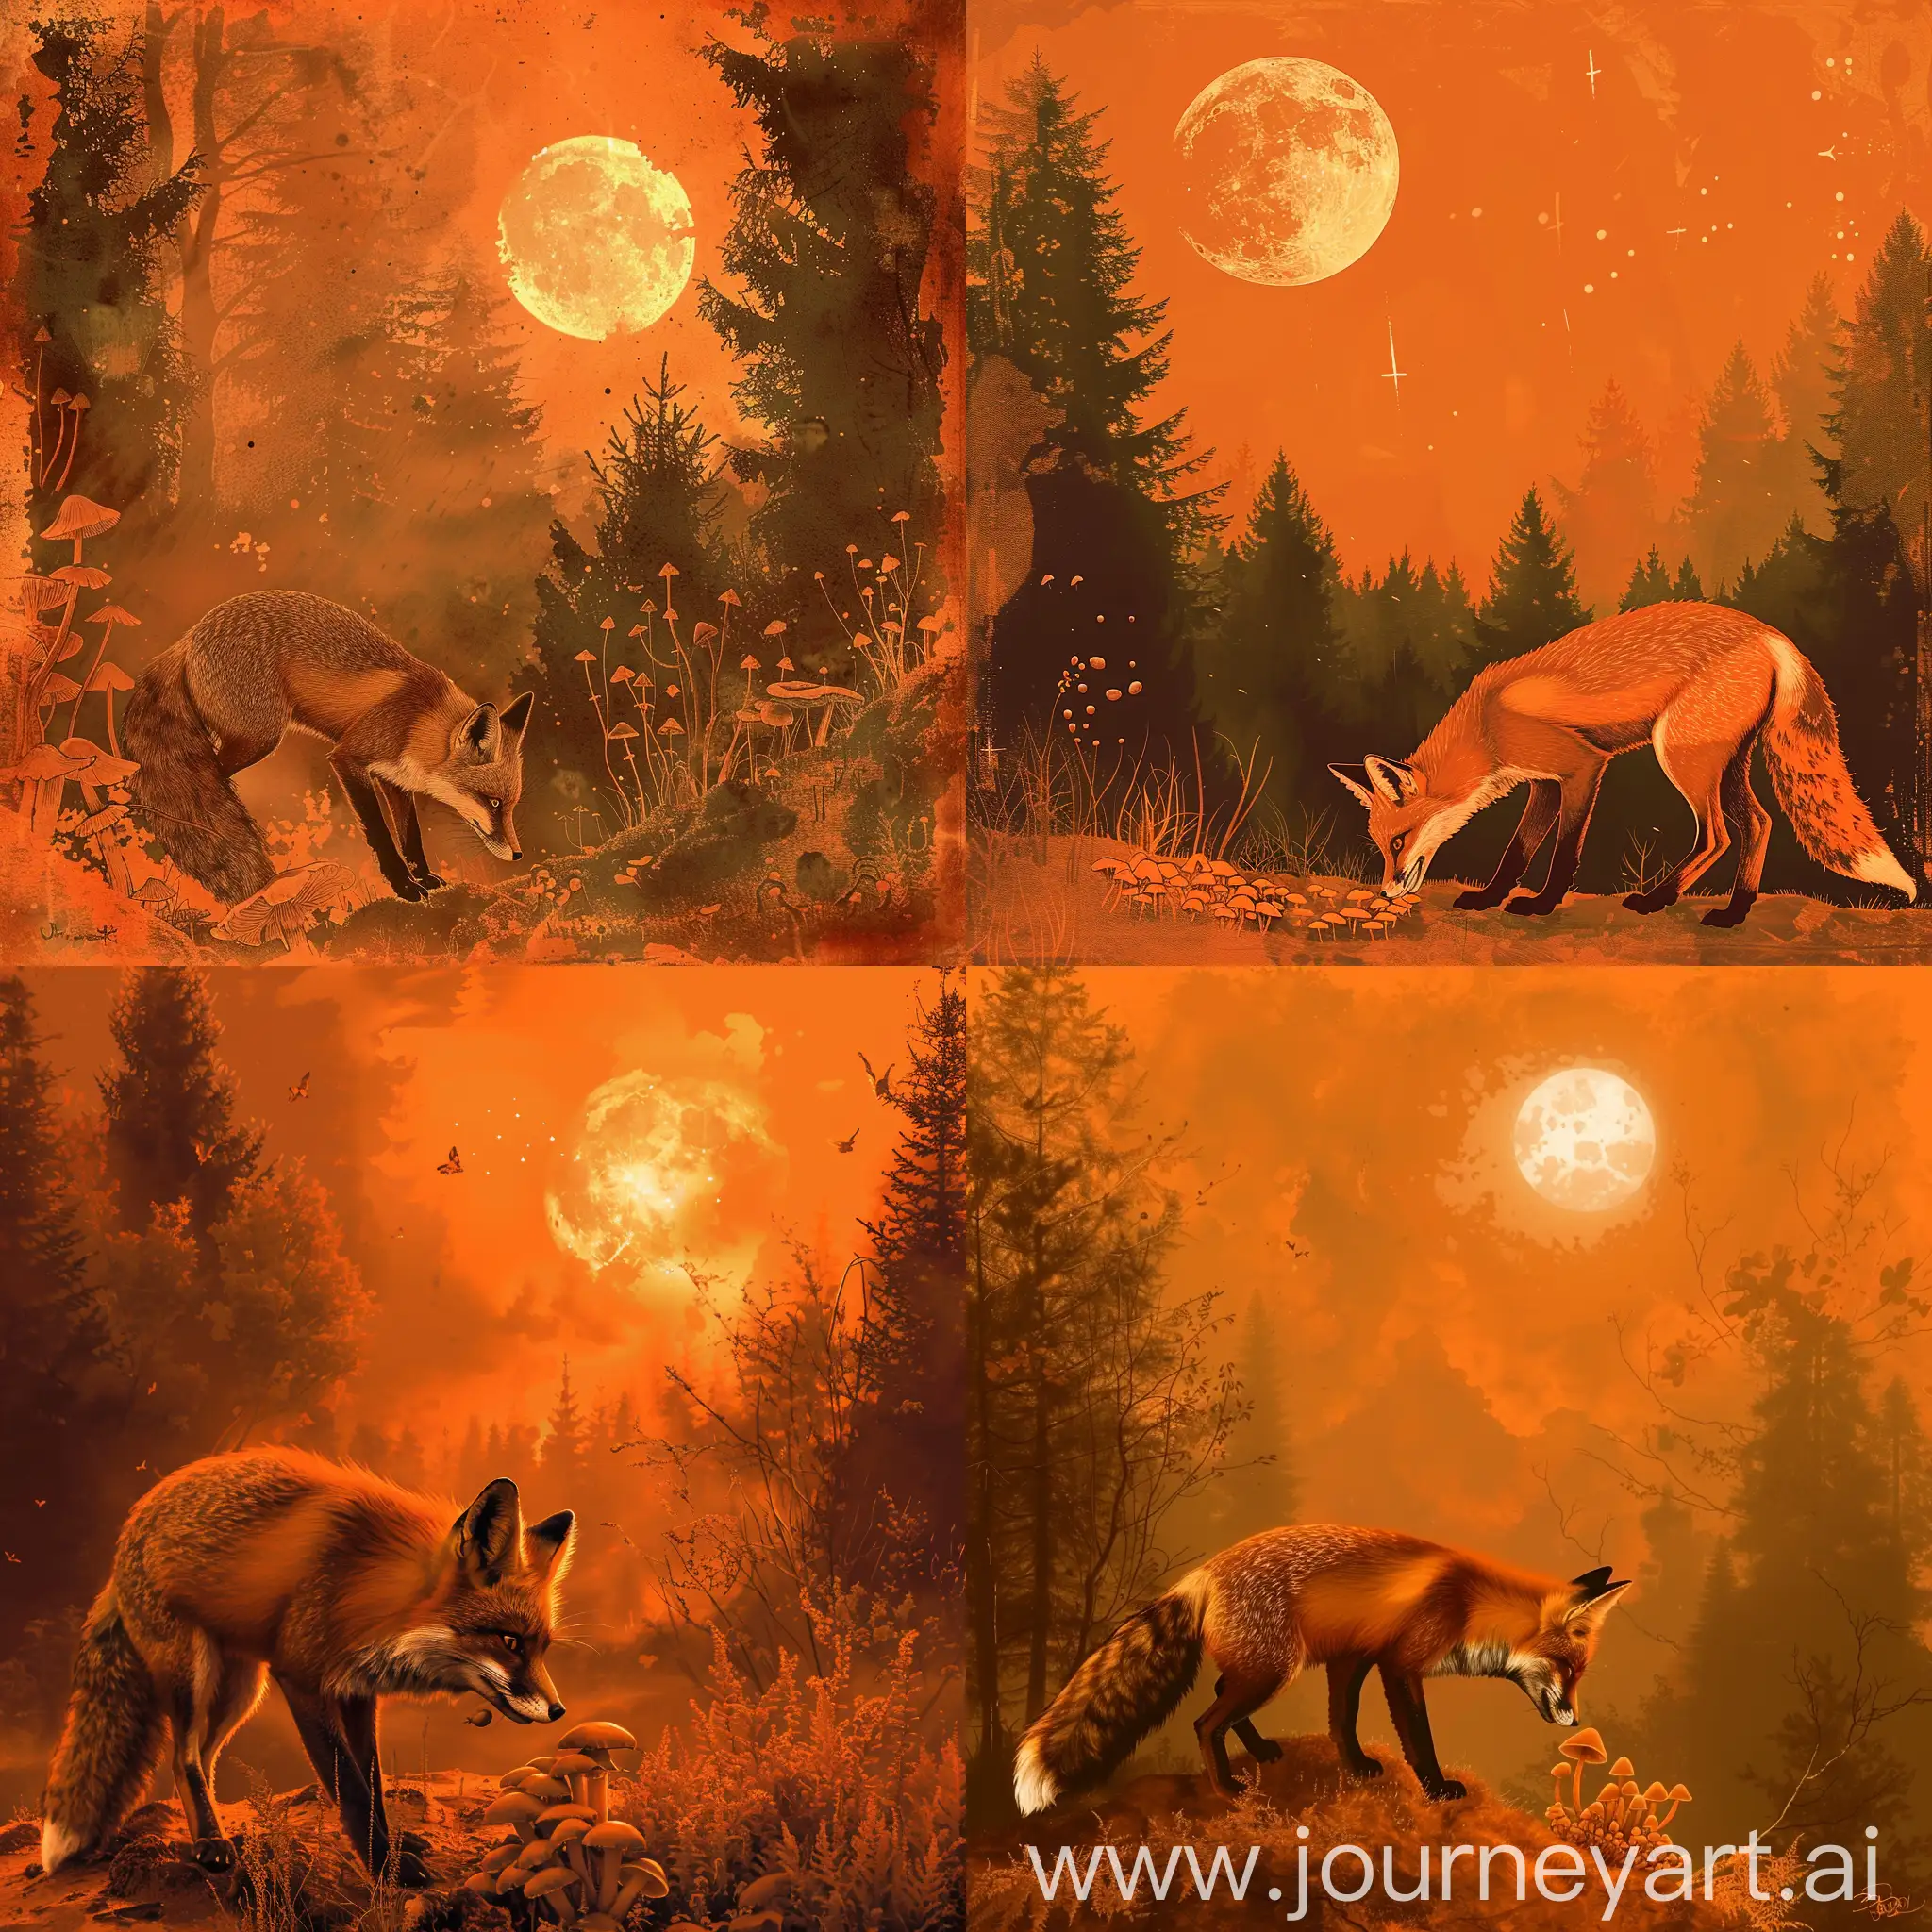 Create a picture in orange tones, which depicts a fox sniffing chanterelles, against a background of trees, forests and a bright moon, the atmosphere is gloomy.